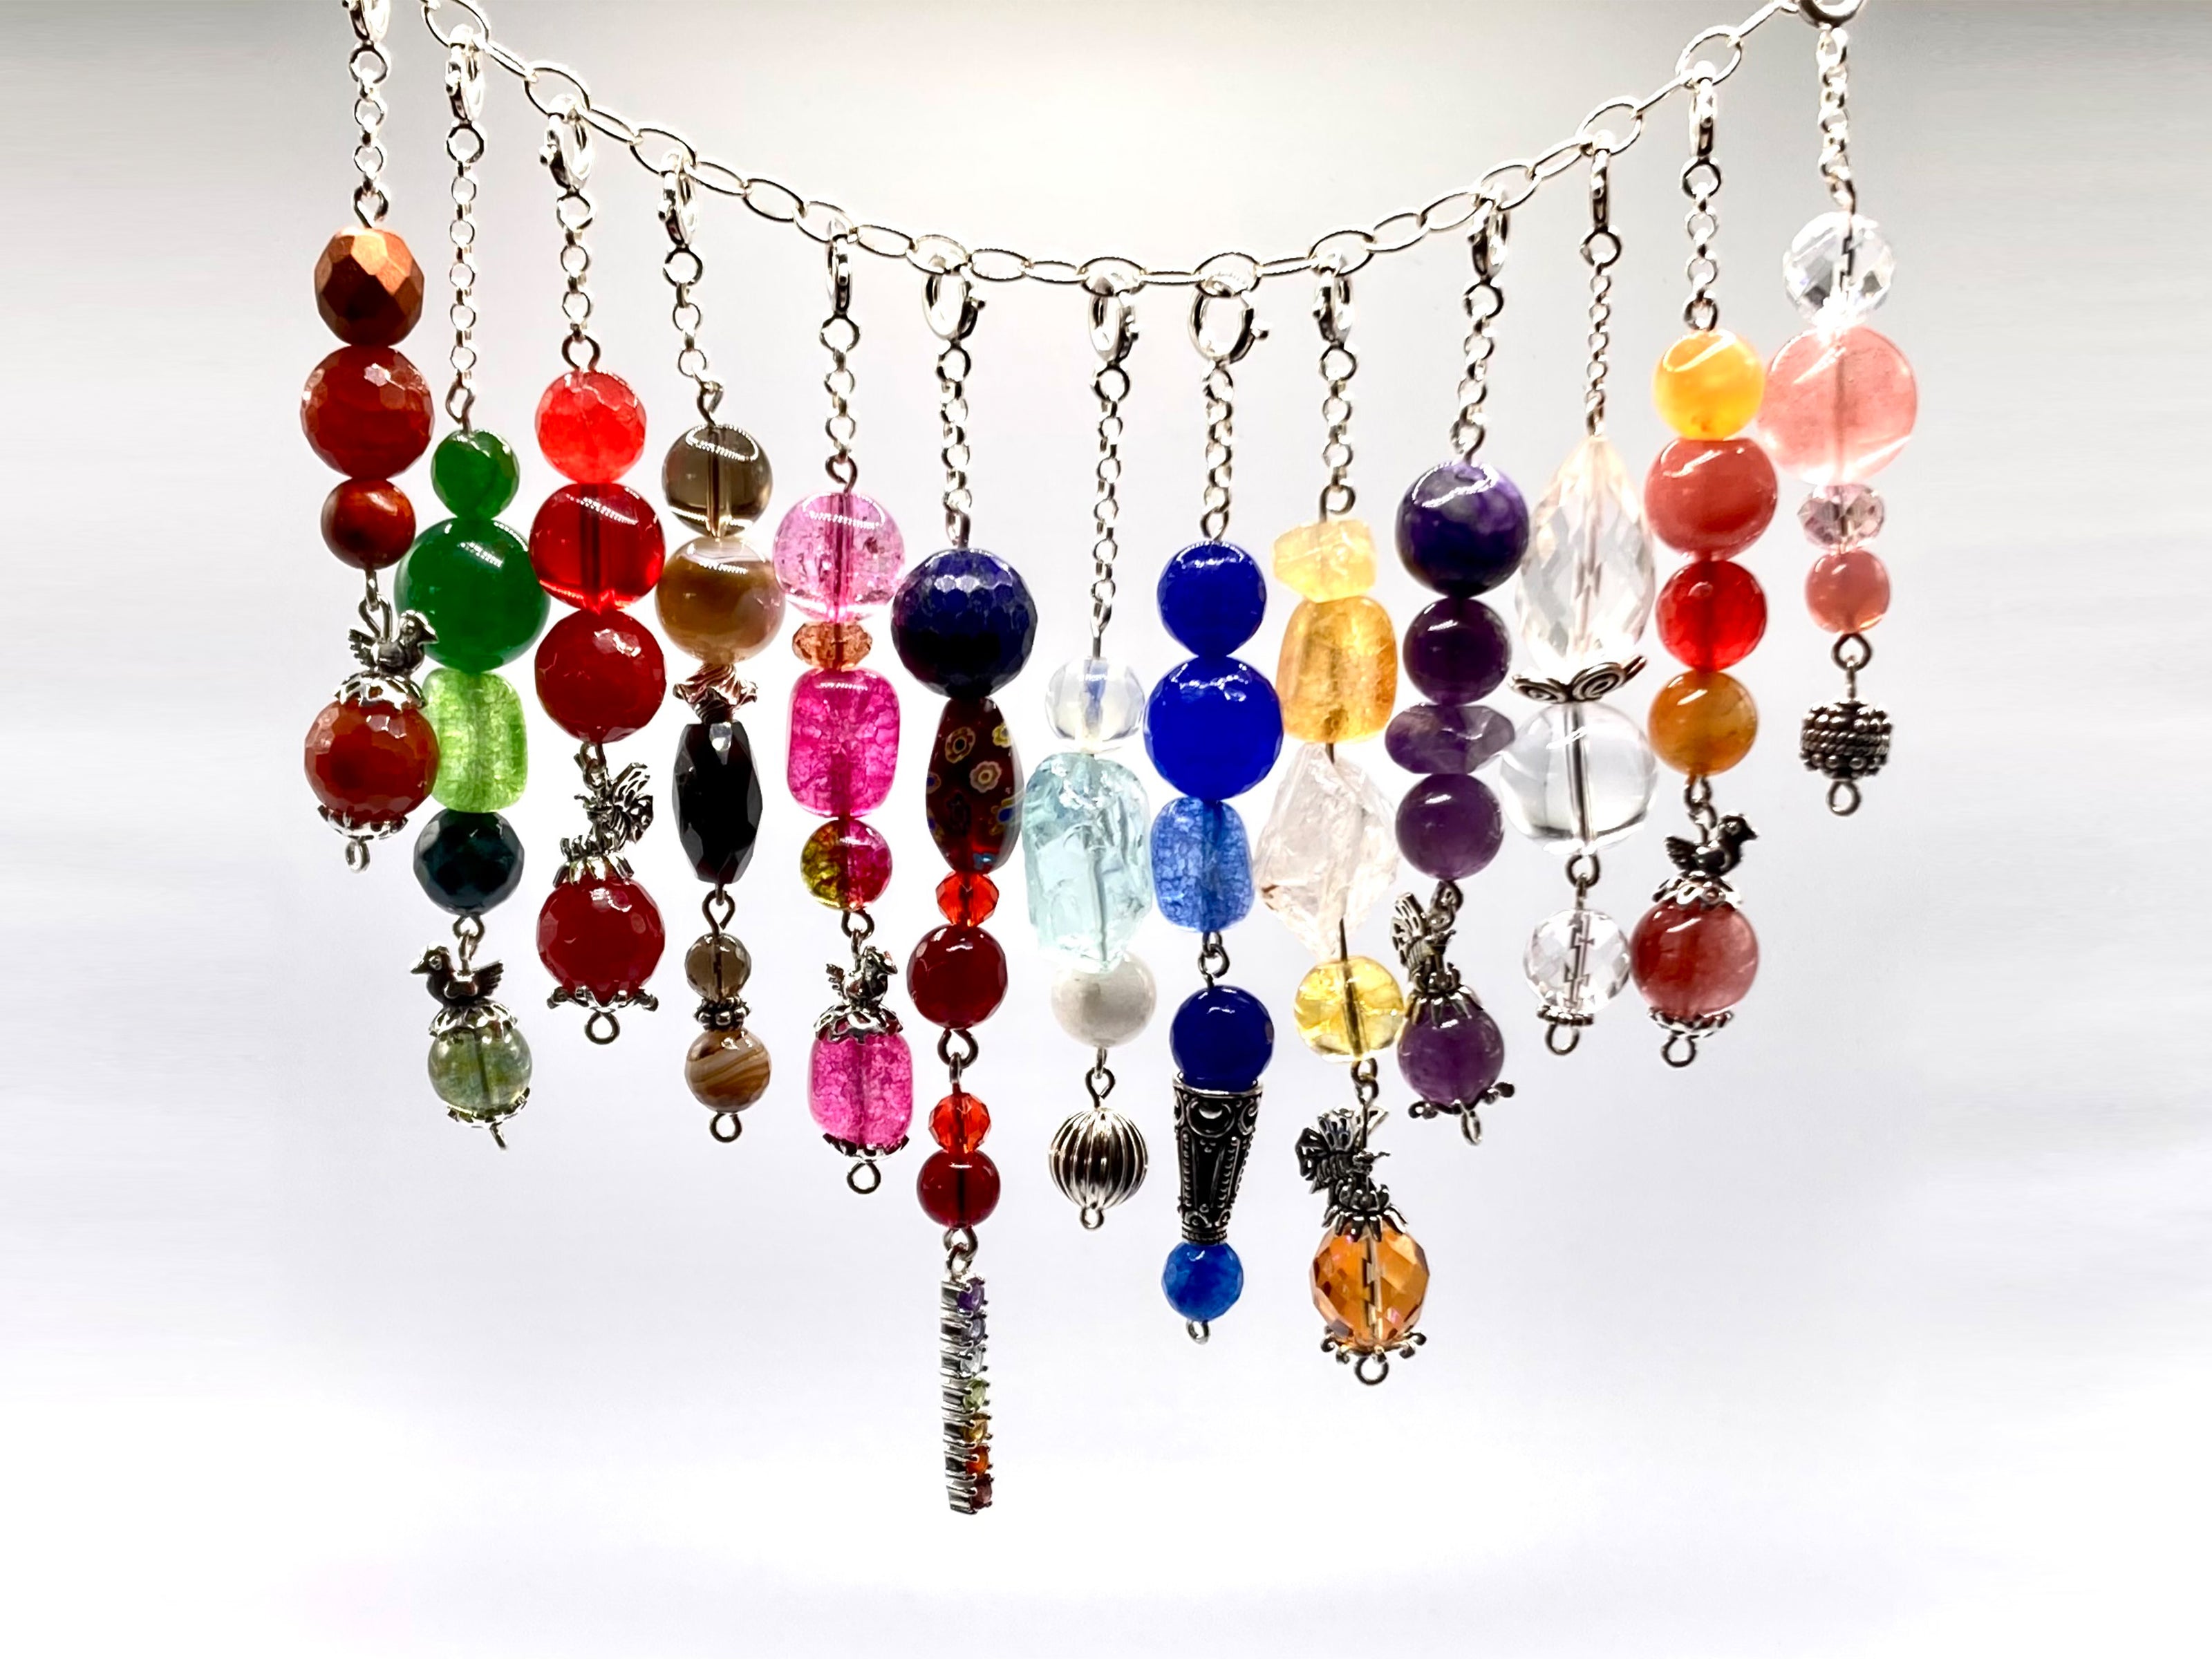 These Gemstone bobbles all have sterling silver beads and caps.